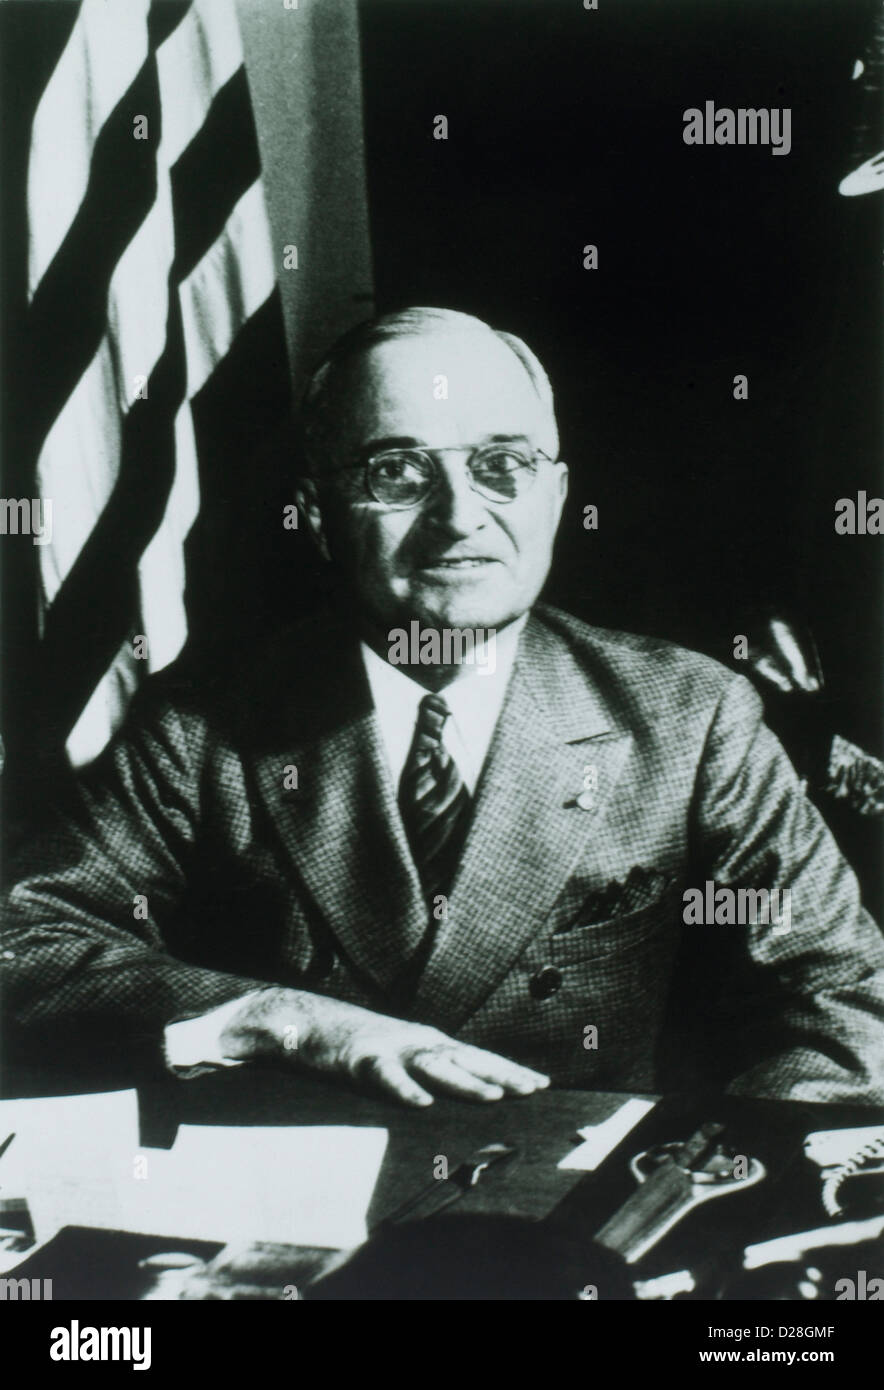 Harry S. Truman (1884-1972), 33rd President of the United States of America, Portrait, 1945 Stock Photo